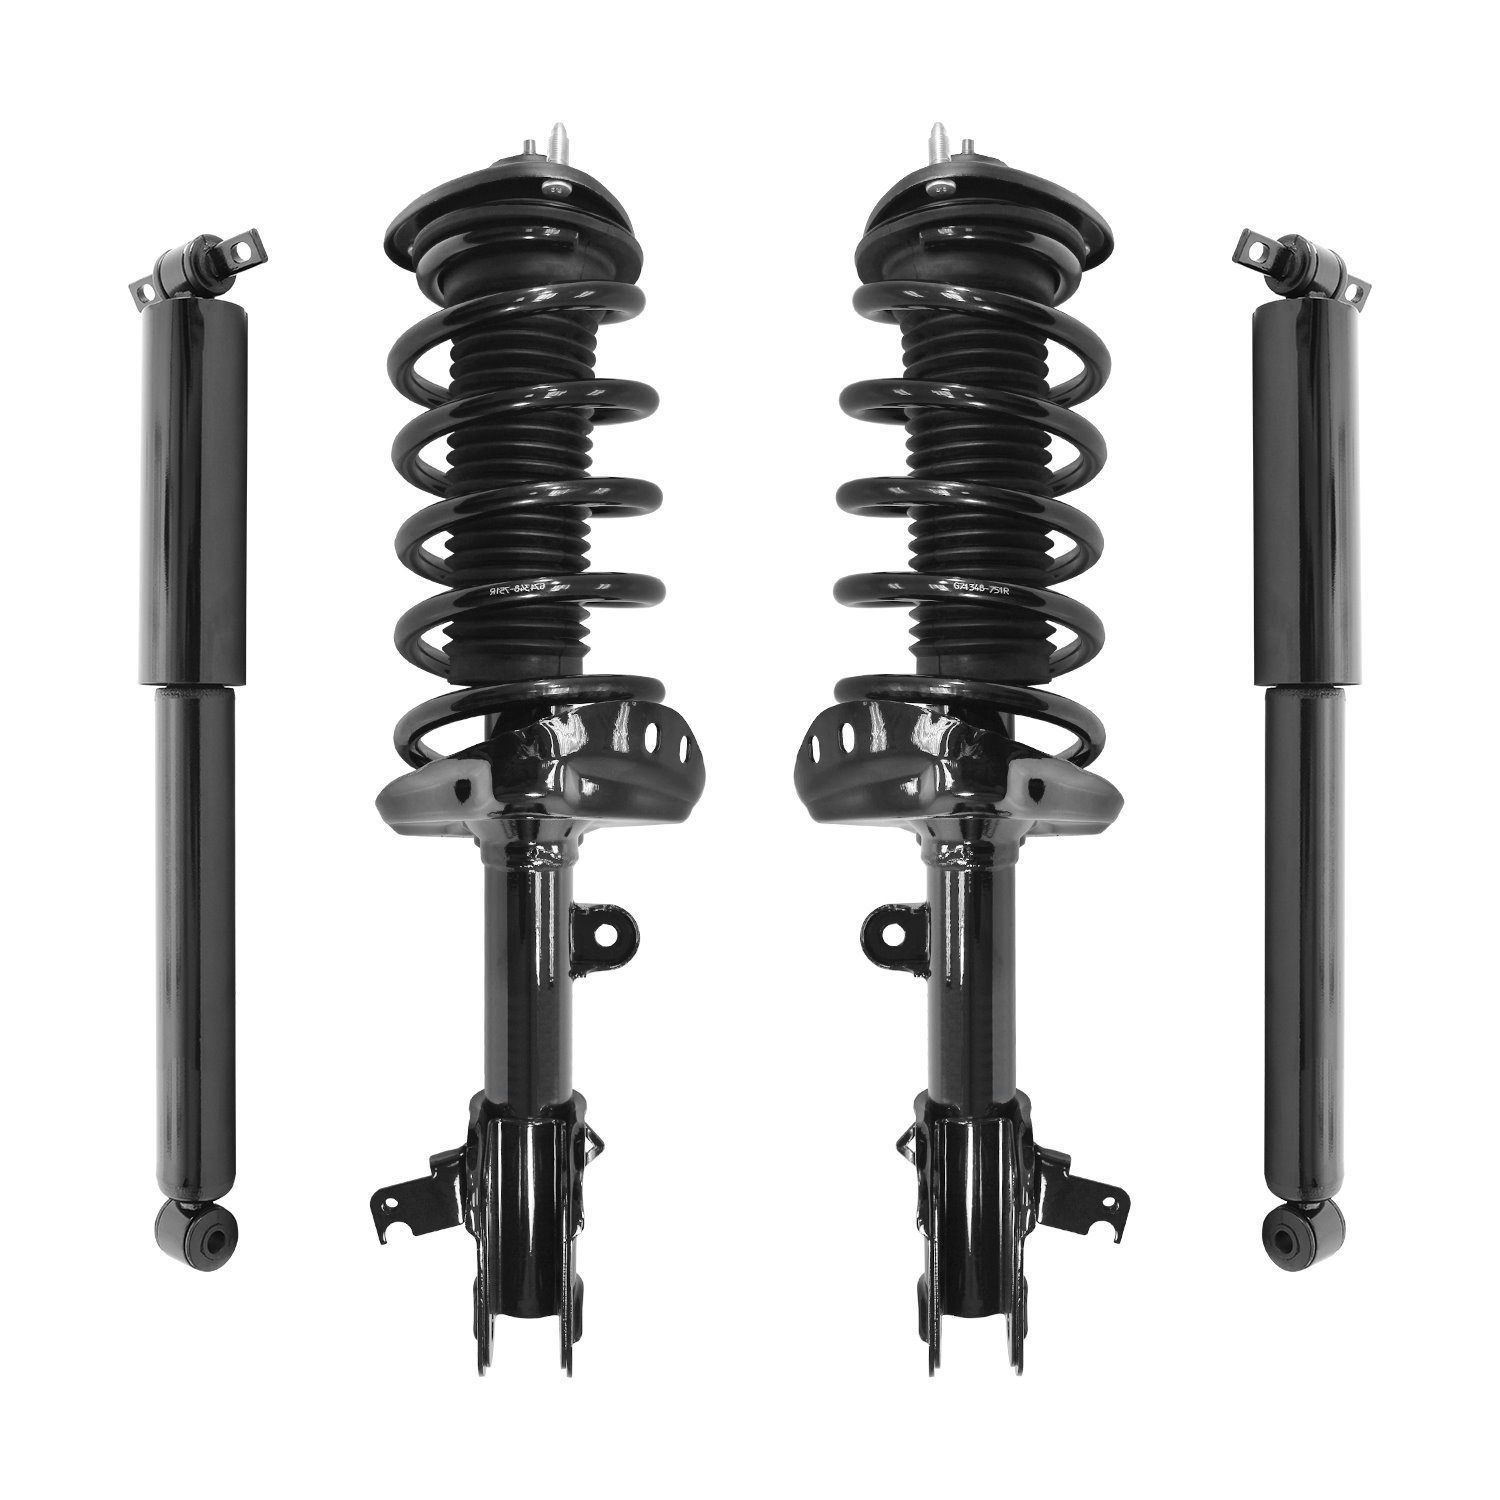 4-11901-250050-001 Front & Rear Suspension Strut & Coil Spring Assembly Fits Select Honda Odyssey